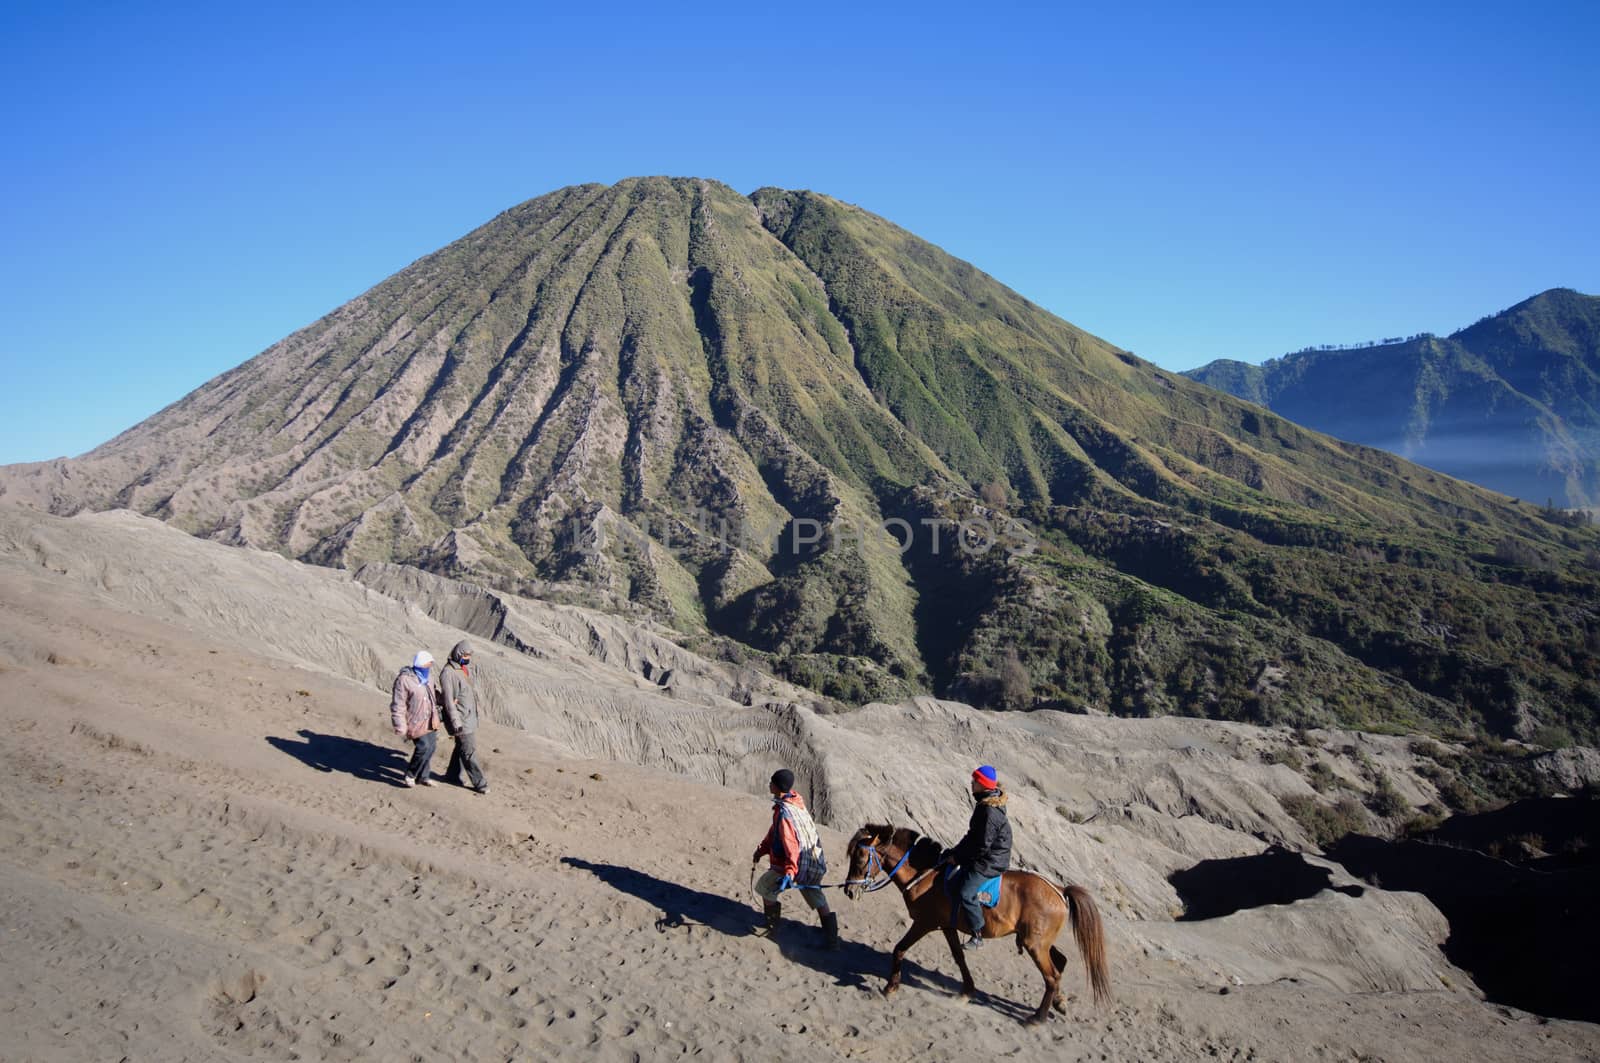 Undefined model posing on a horse under the Bromo massif. Mount Bromo is an active volcano and part of the Tengger massif, in East Java. June 28, 2014.